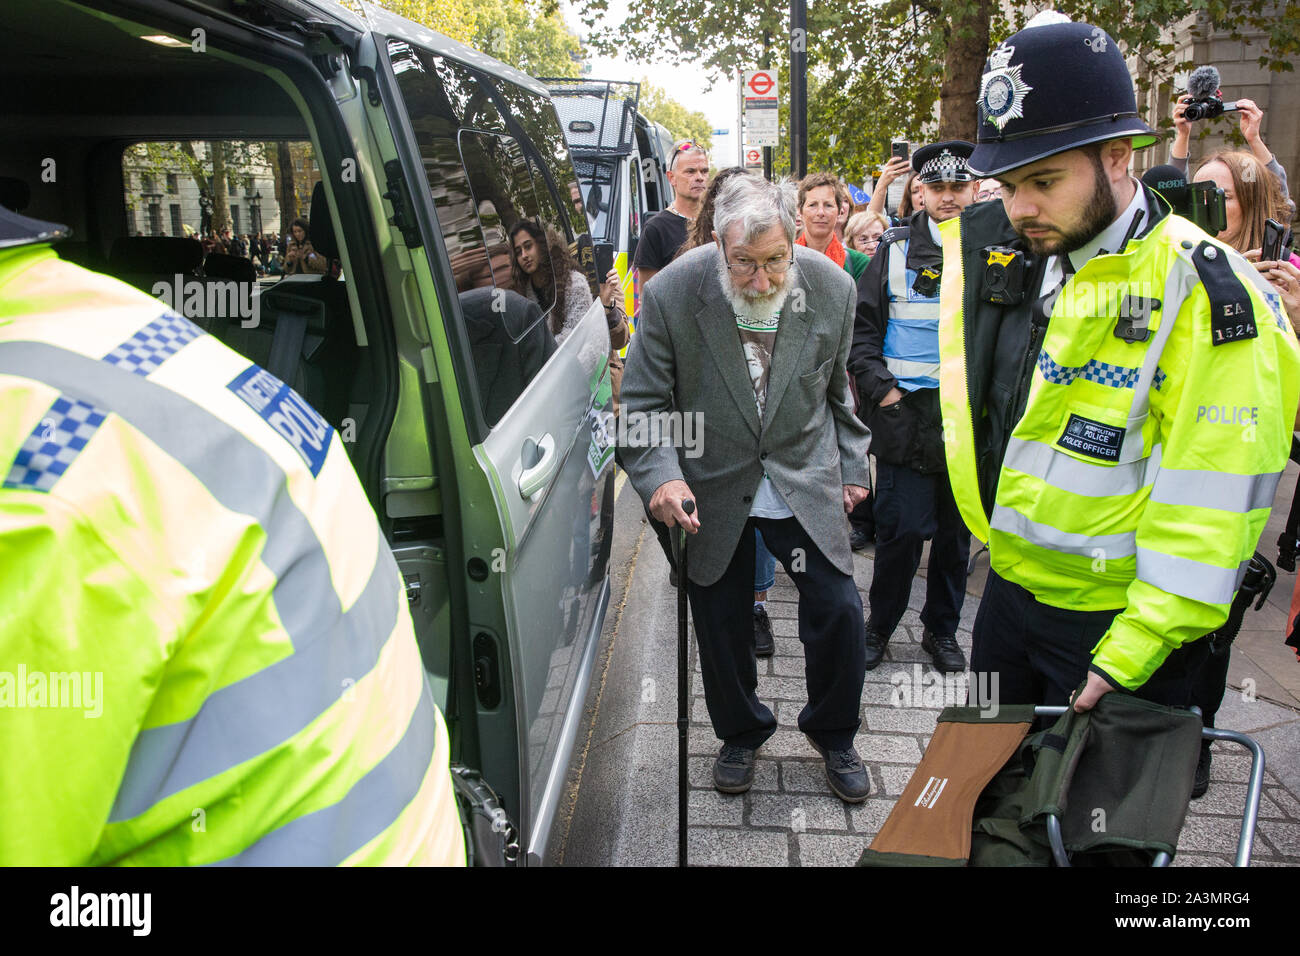 London, UK. 9 October, 2019. John Lynes, a 91-year-old climate activist from Extinction Rebellion is arrested by police officers using Section 14 of the Public Order Act 1986 after blocking Whitehall on the third day of International Rebellion protests to demand a government declaration of a climate and ecological emergency, a commitment to halting biodiversity loss and net zero carbon emissions by 2025 and for the government to create and be led by the decisions of a Citizens’ Assembly on climate and ecological justice. Credit: Mark Kerrison/Alamy Live News Stock Photo